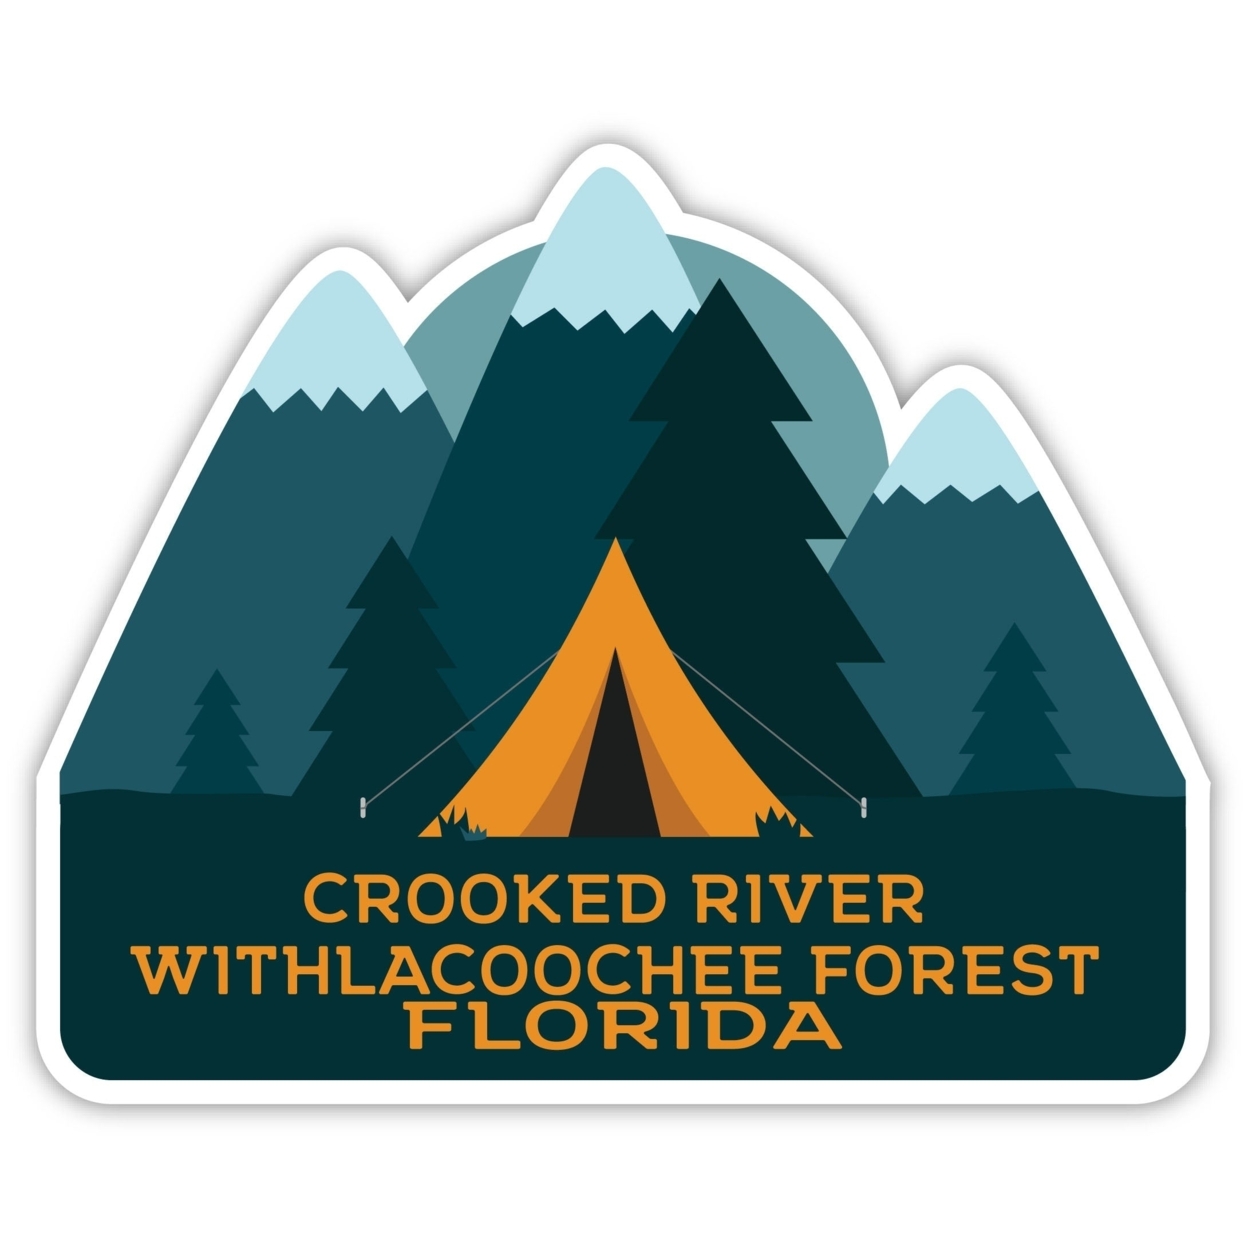 Crooked River Withlacoochee Forest Florida Souvenir Decorative Stickers (Choose Theme And Size) - Single Unit, 10-Inch, Tent